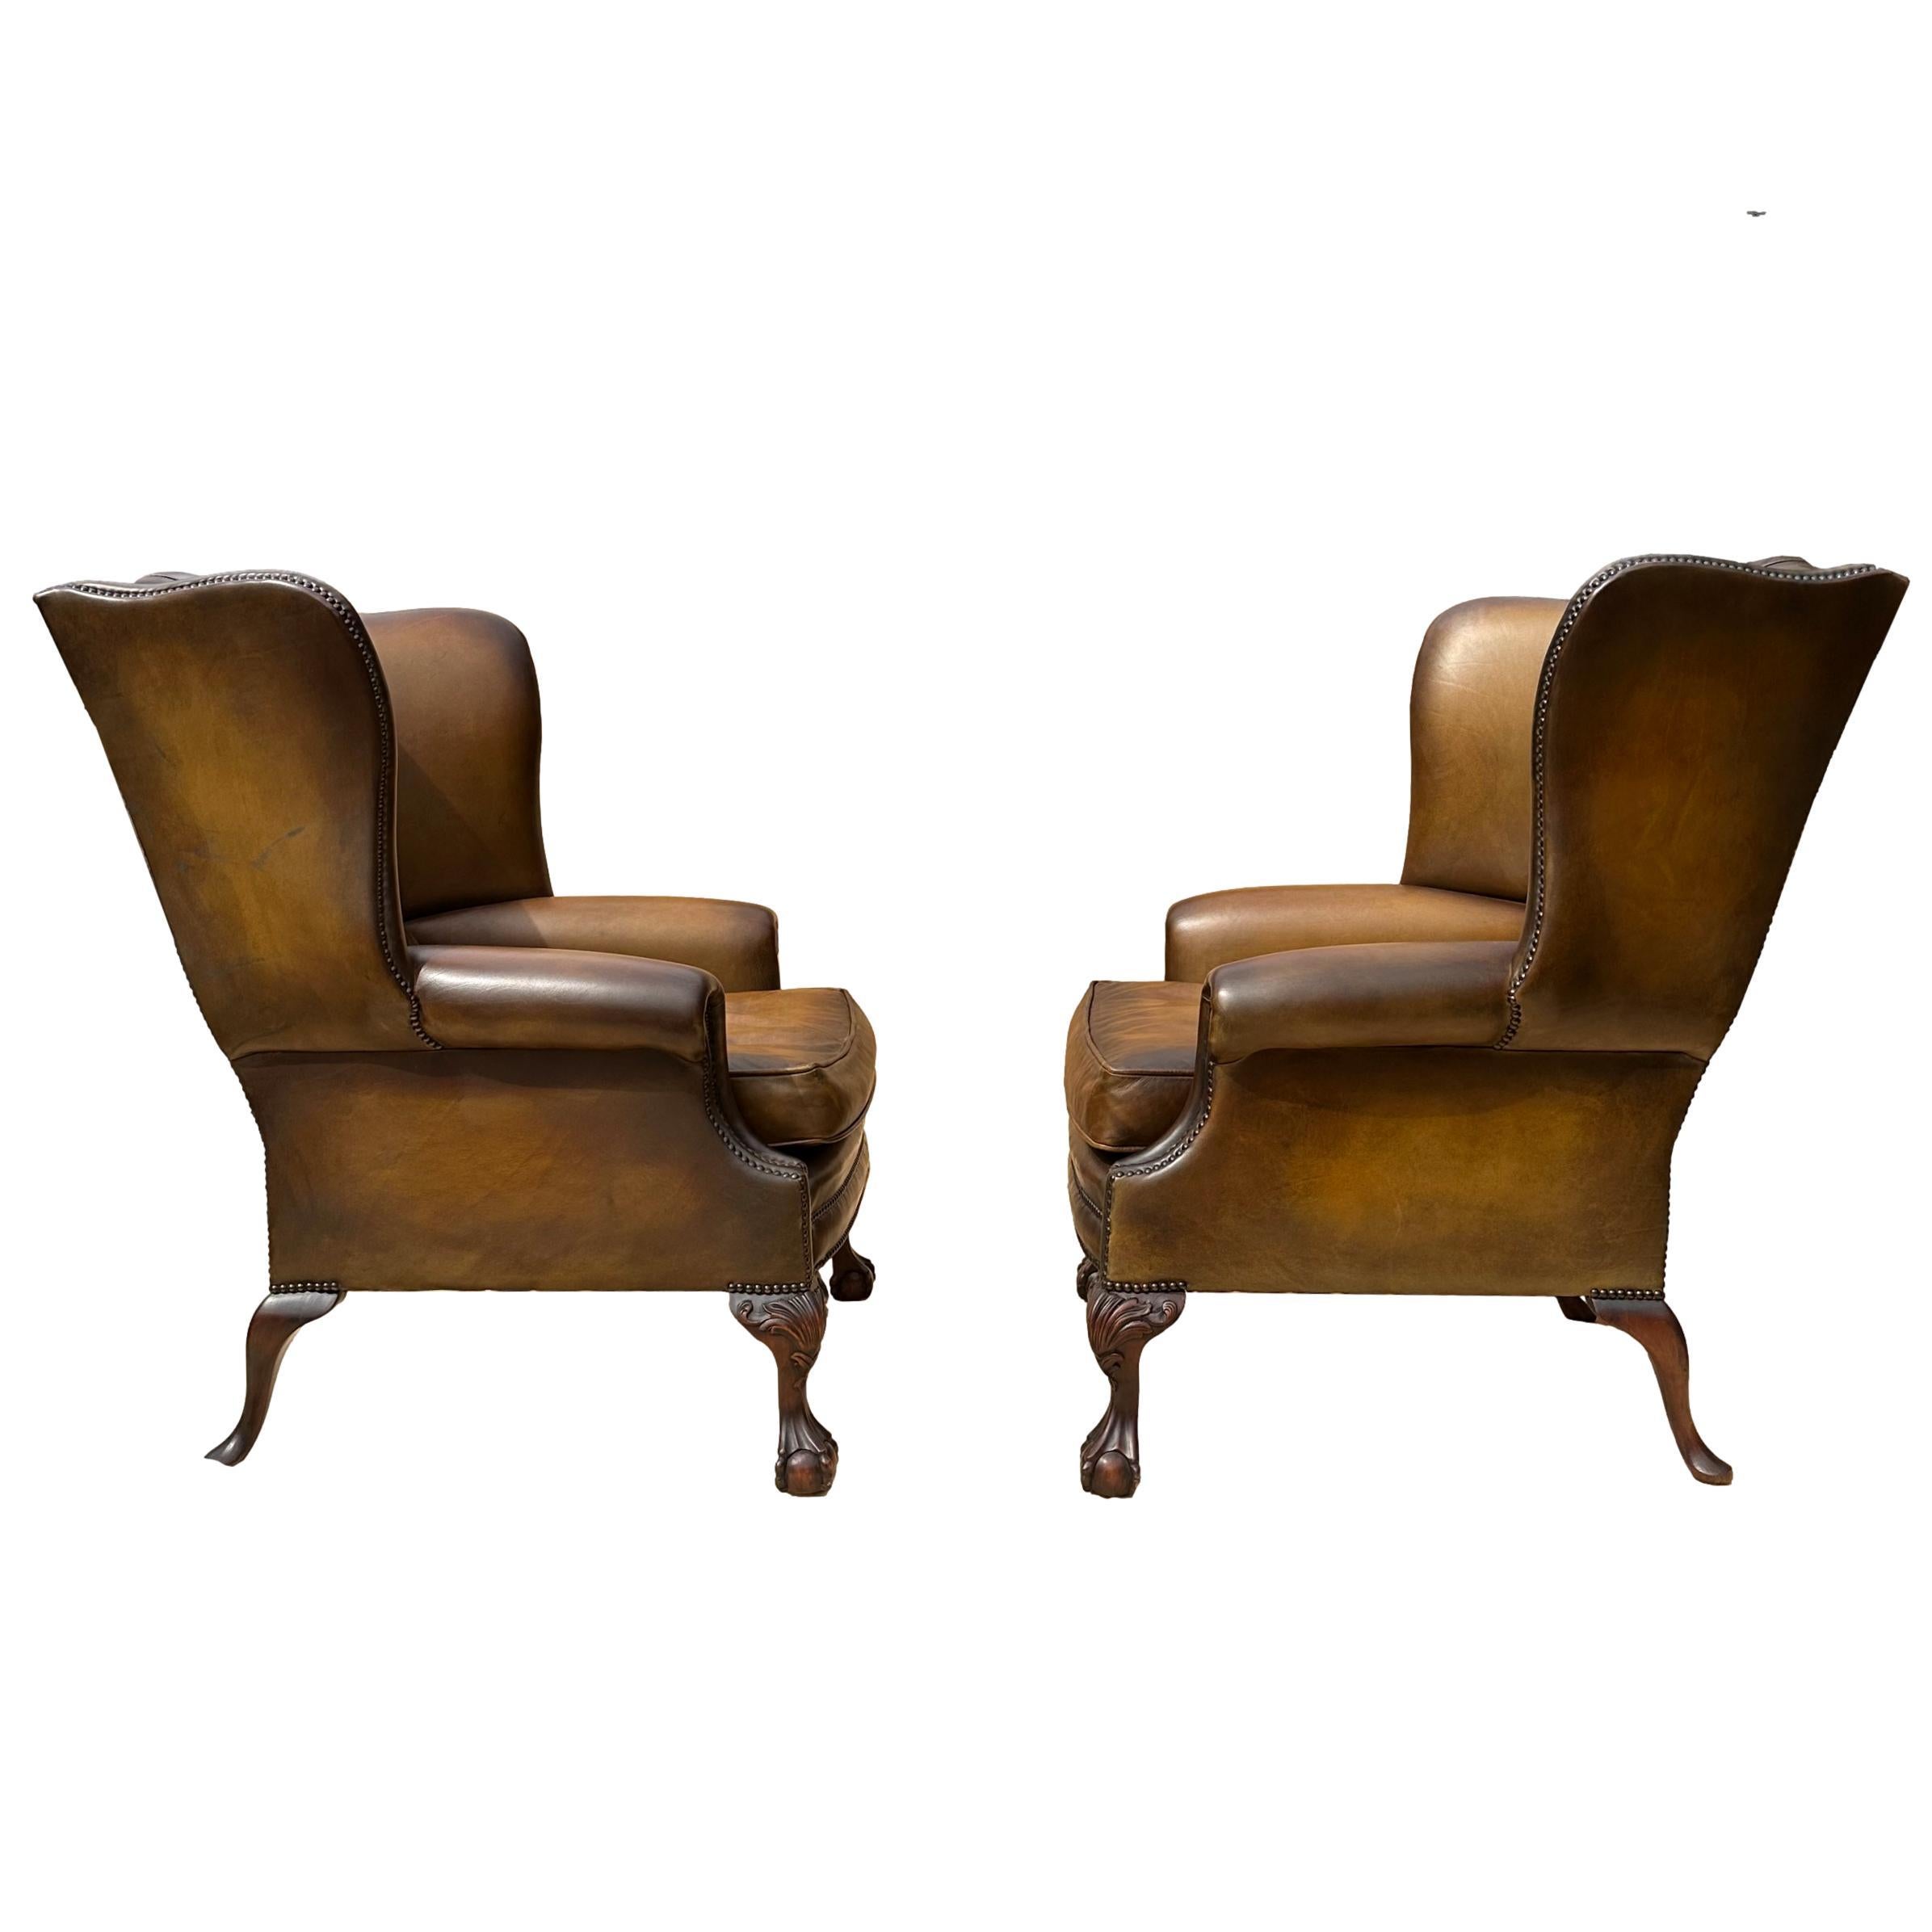 Edwardian Pair of Leather Wing Back Tufted Chairs on Ball & Claw Feet, English, ca. 1920. For Sale